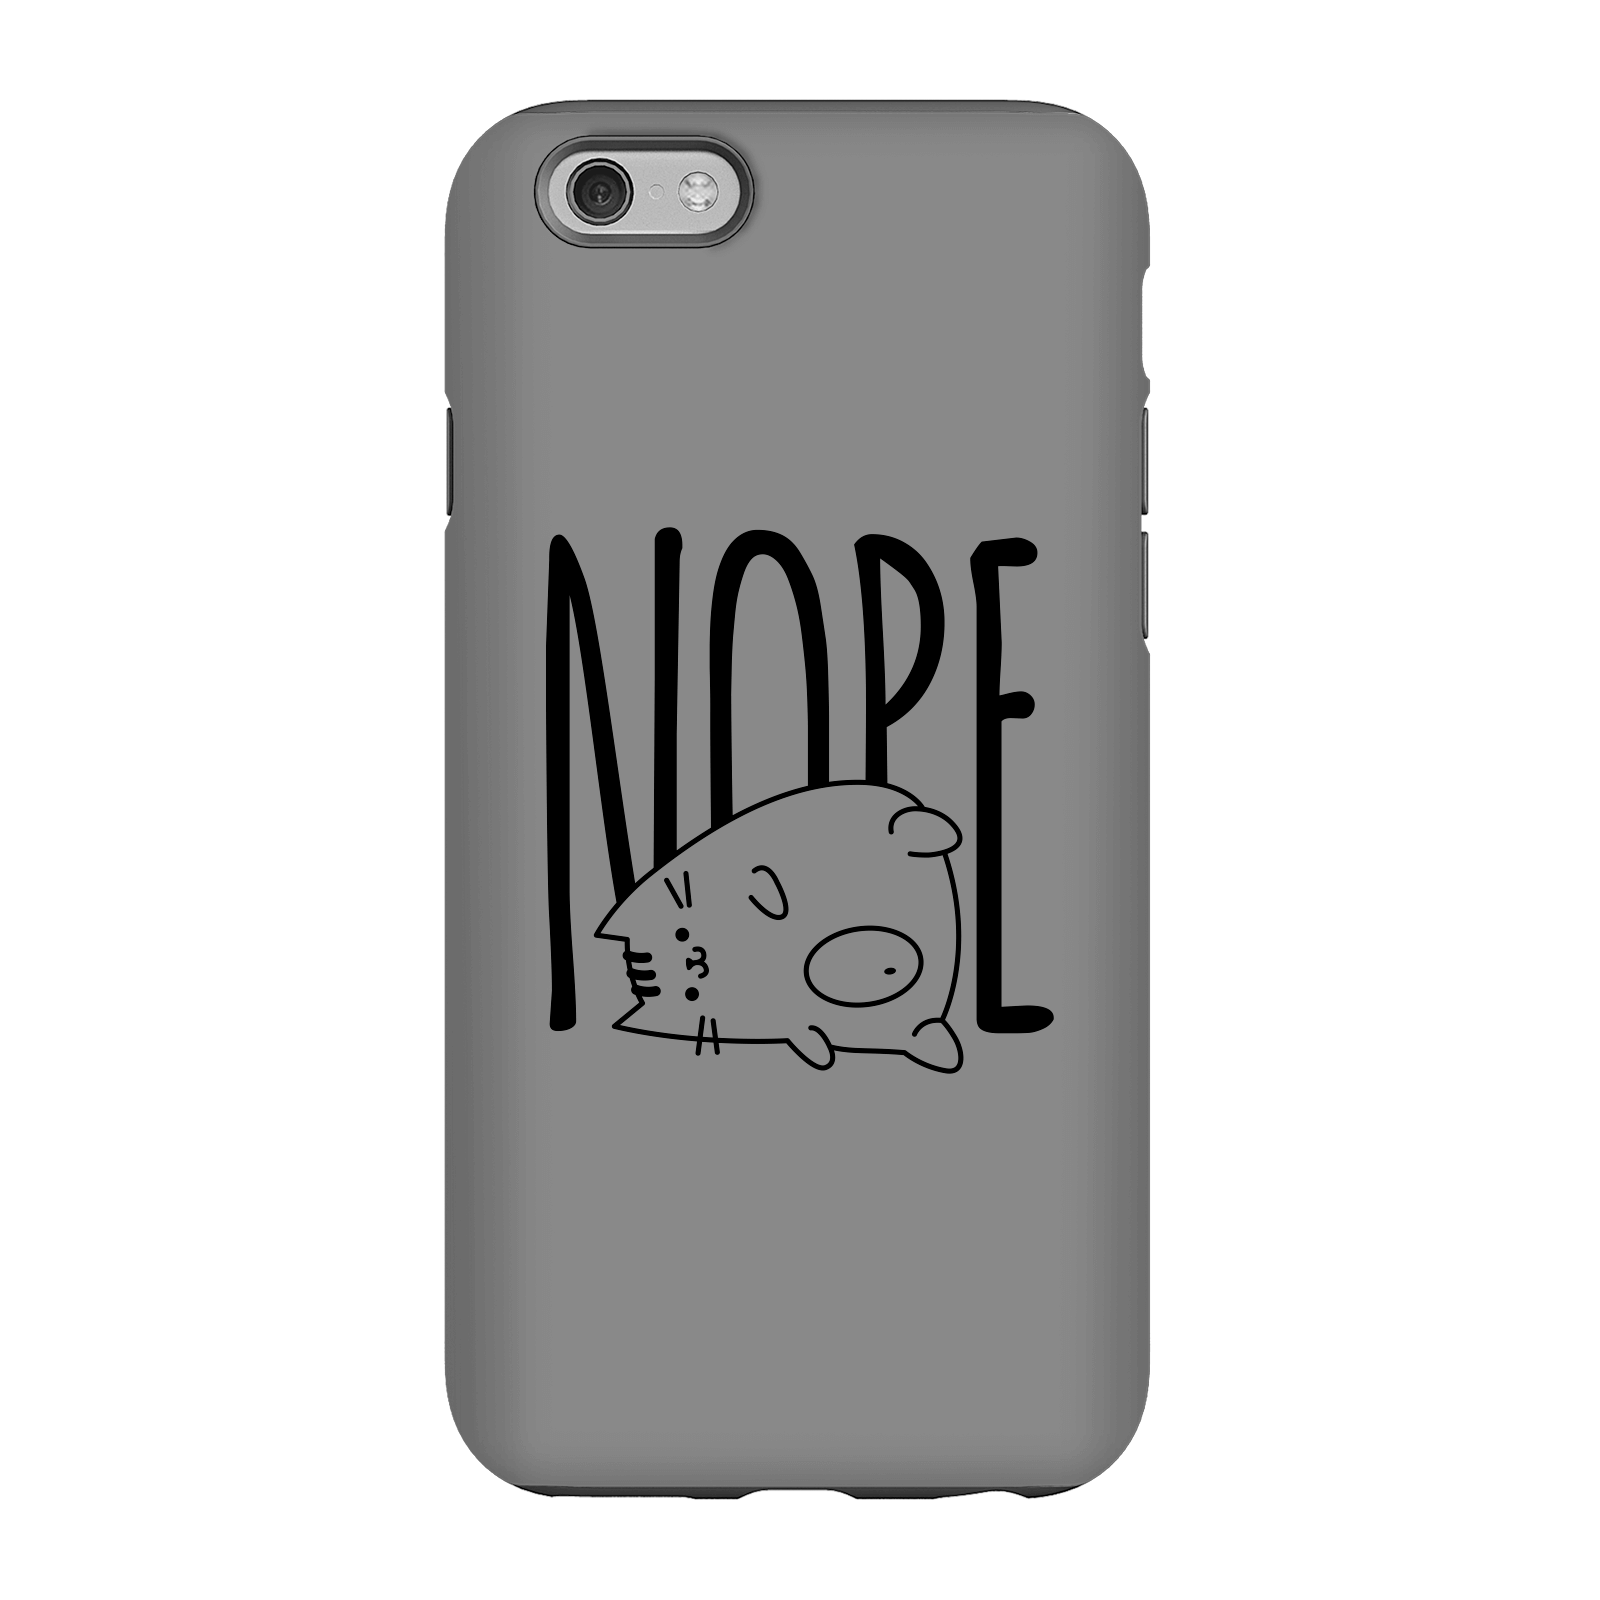 Nope Phone Case for iPhone and Android - iPhone 6 - Tough Case - Gloss